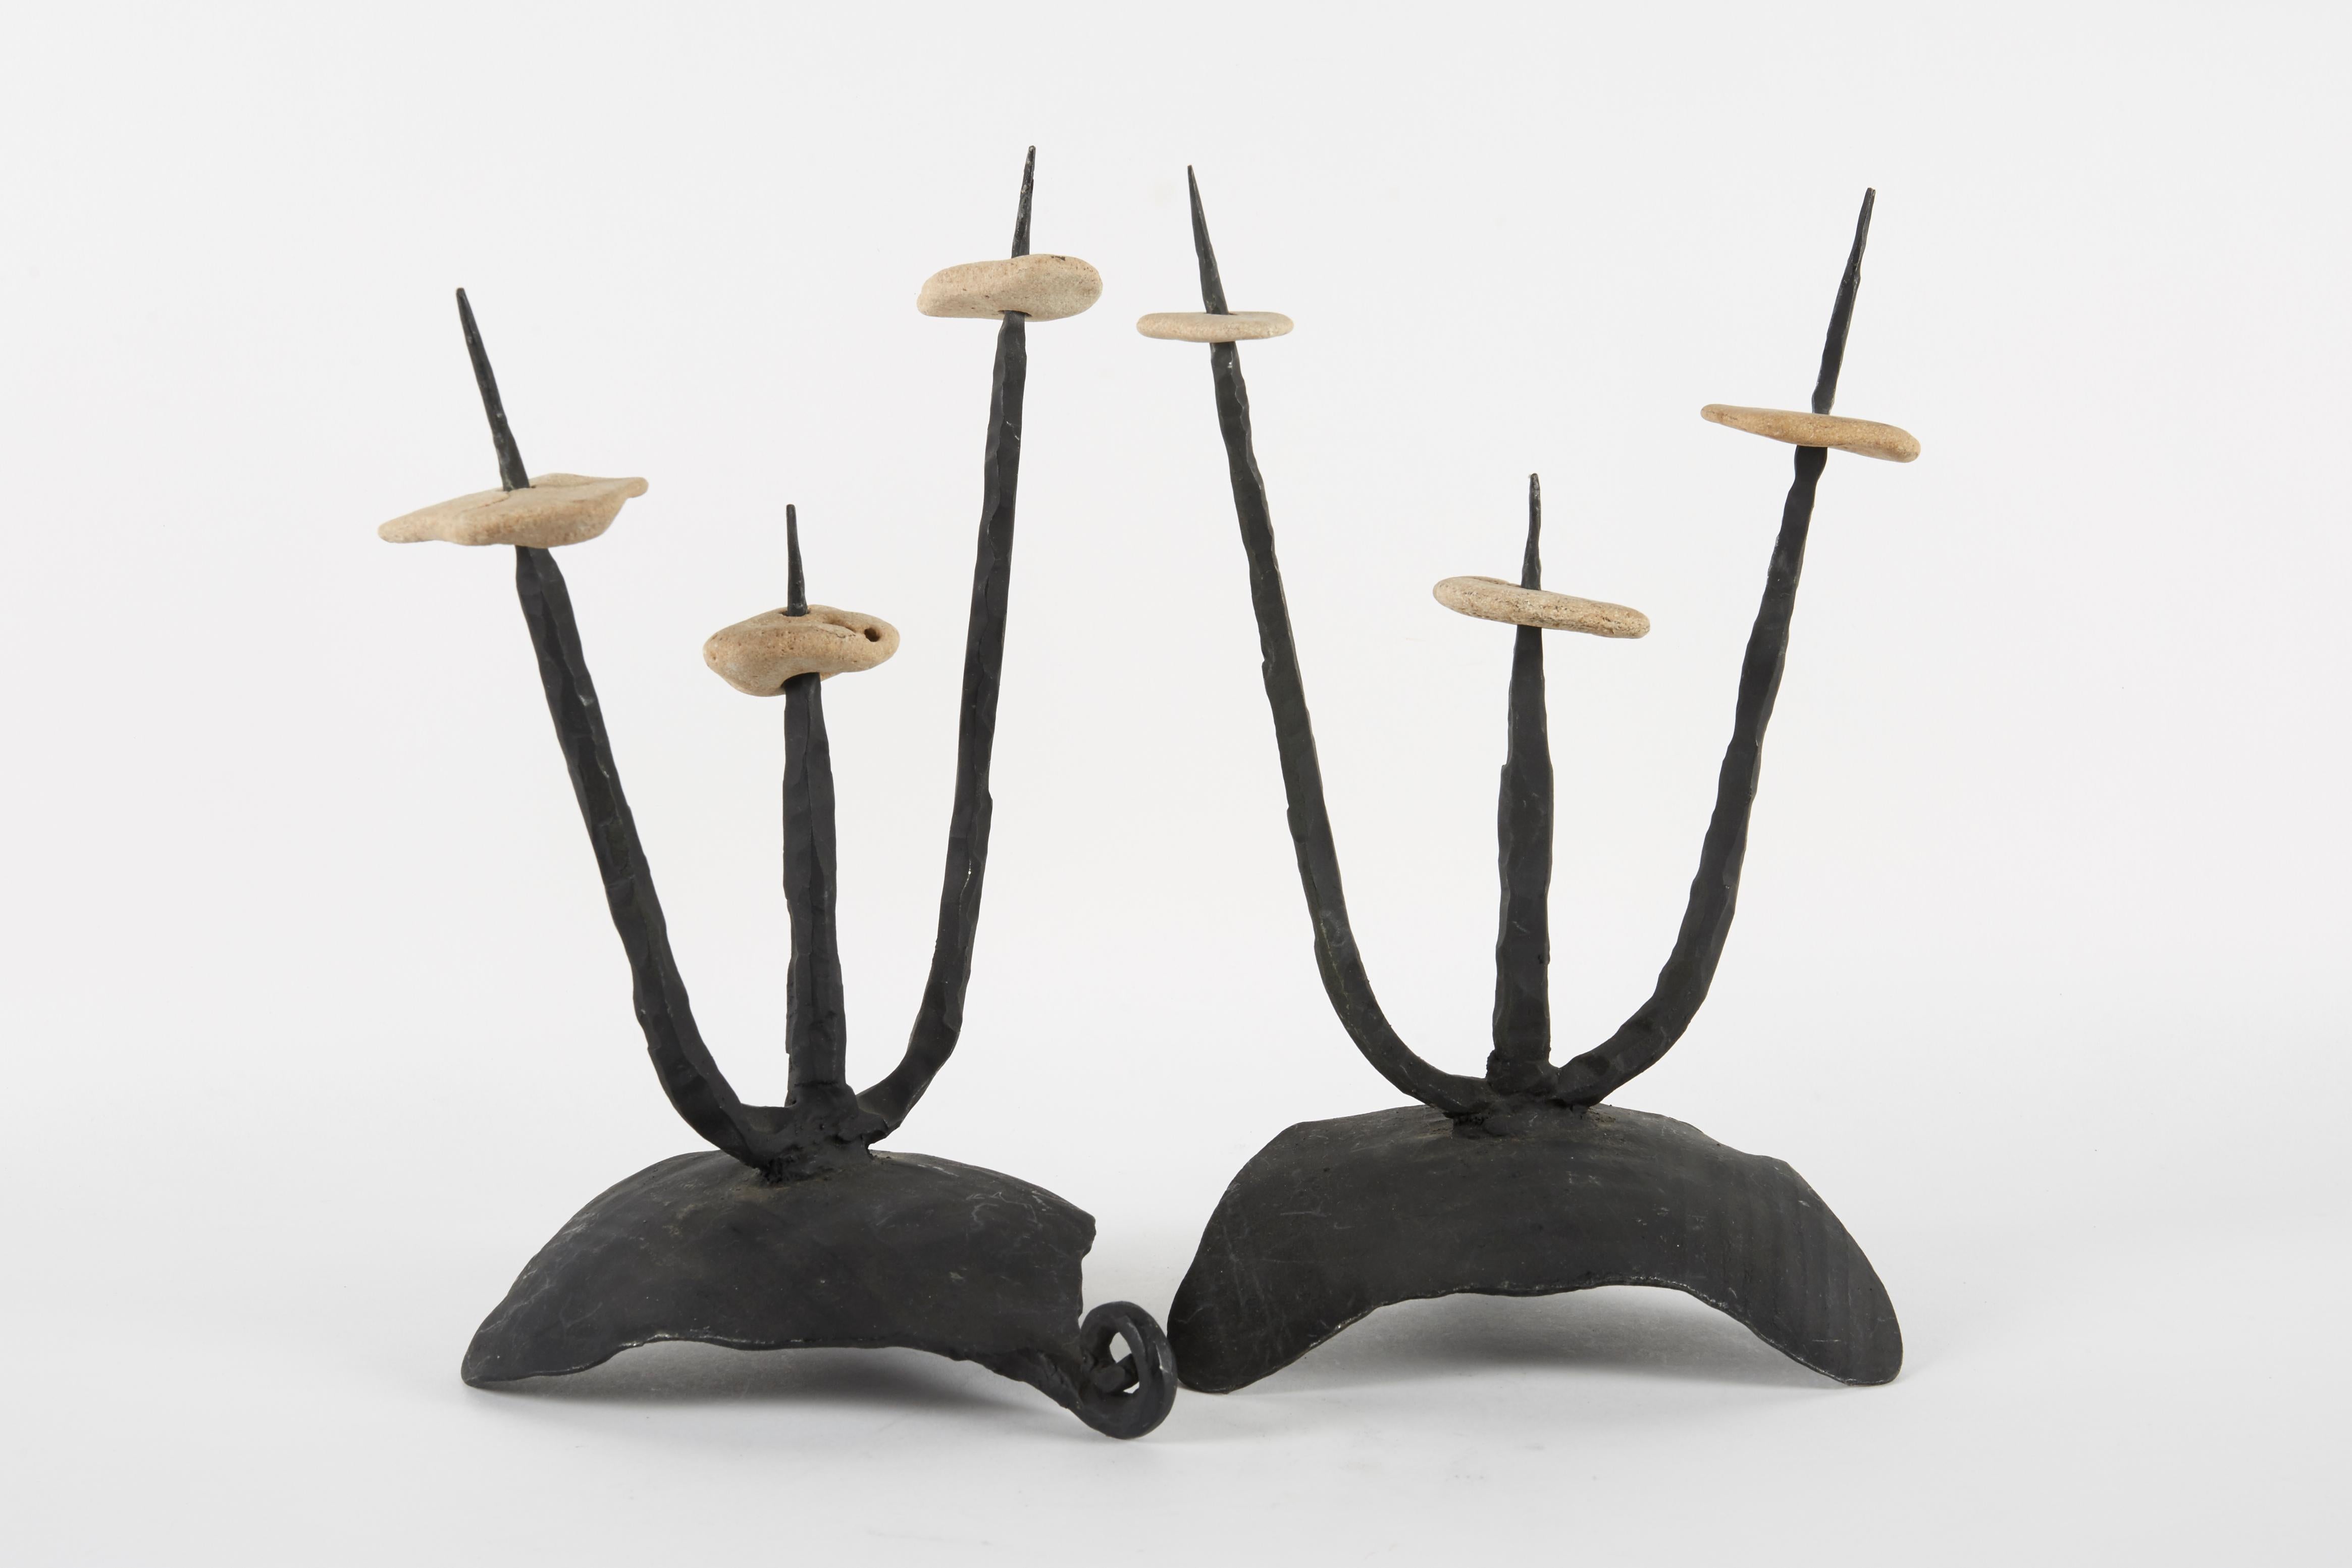 Mid-20th Century Pair of Brutalist Candleholders/Sculptures by David Palombo In Excellent Condition For Sale In New York, NY